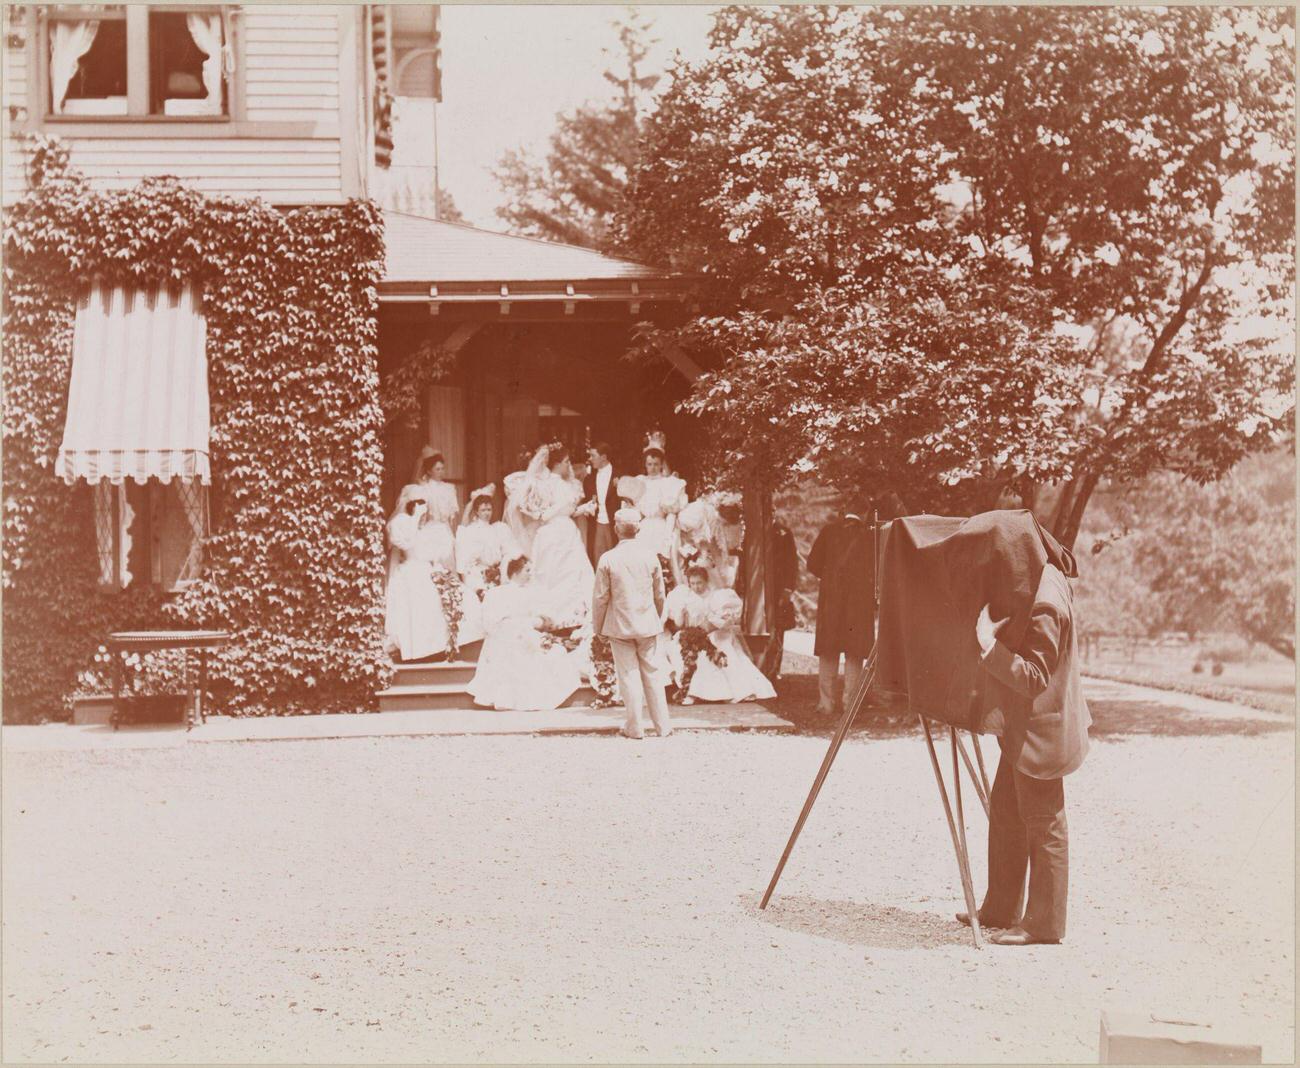 A Photographer Waits As A Bridal Party Arranges Themselves For A Wedding Portrait On The Steps Of A Staten Island Home, June 1, 1895. At The Wedding, Anne Flemming Cameron Married Belmont Tiffany.